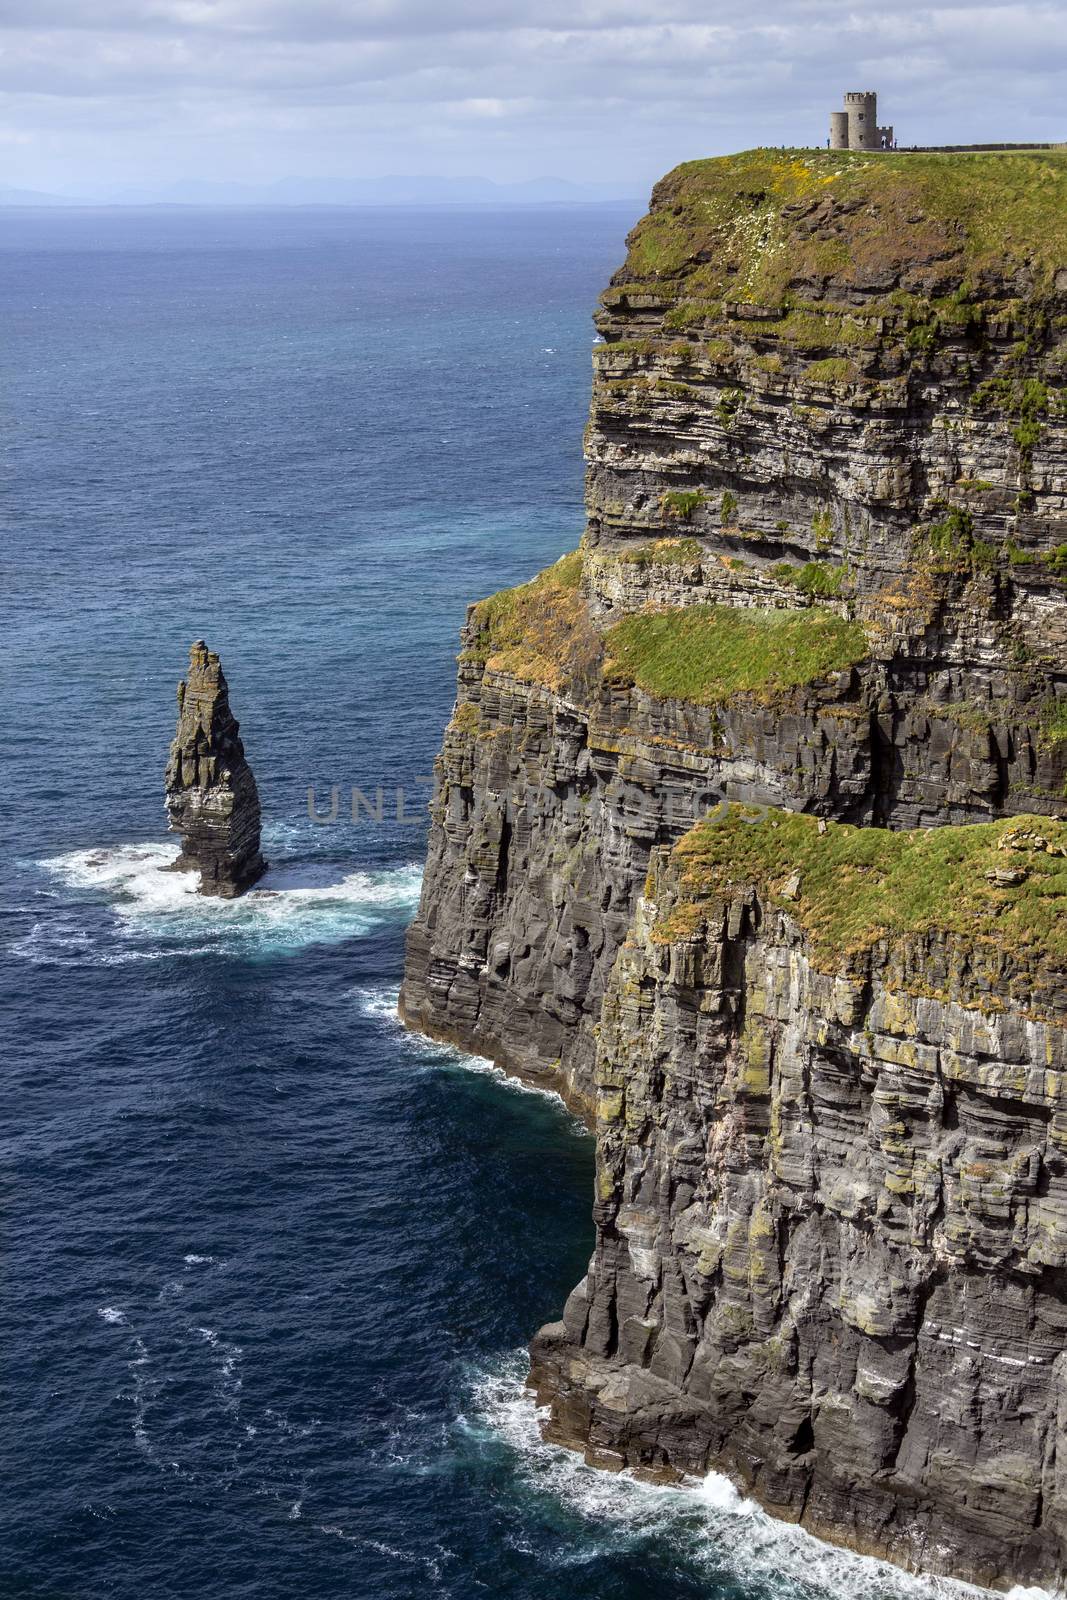 The Cliffs of Moher - located at the southwestern edge of the Burren region in County Clare, Ireland. They rise 120 metres (390 ft) above the Atlantic Ocean at Hag's Head and reach their maximum height of 214 metres (702 ft) here just north of O'Brien's Tower which can be seen on the cliff top.